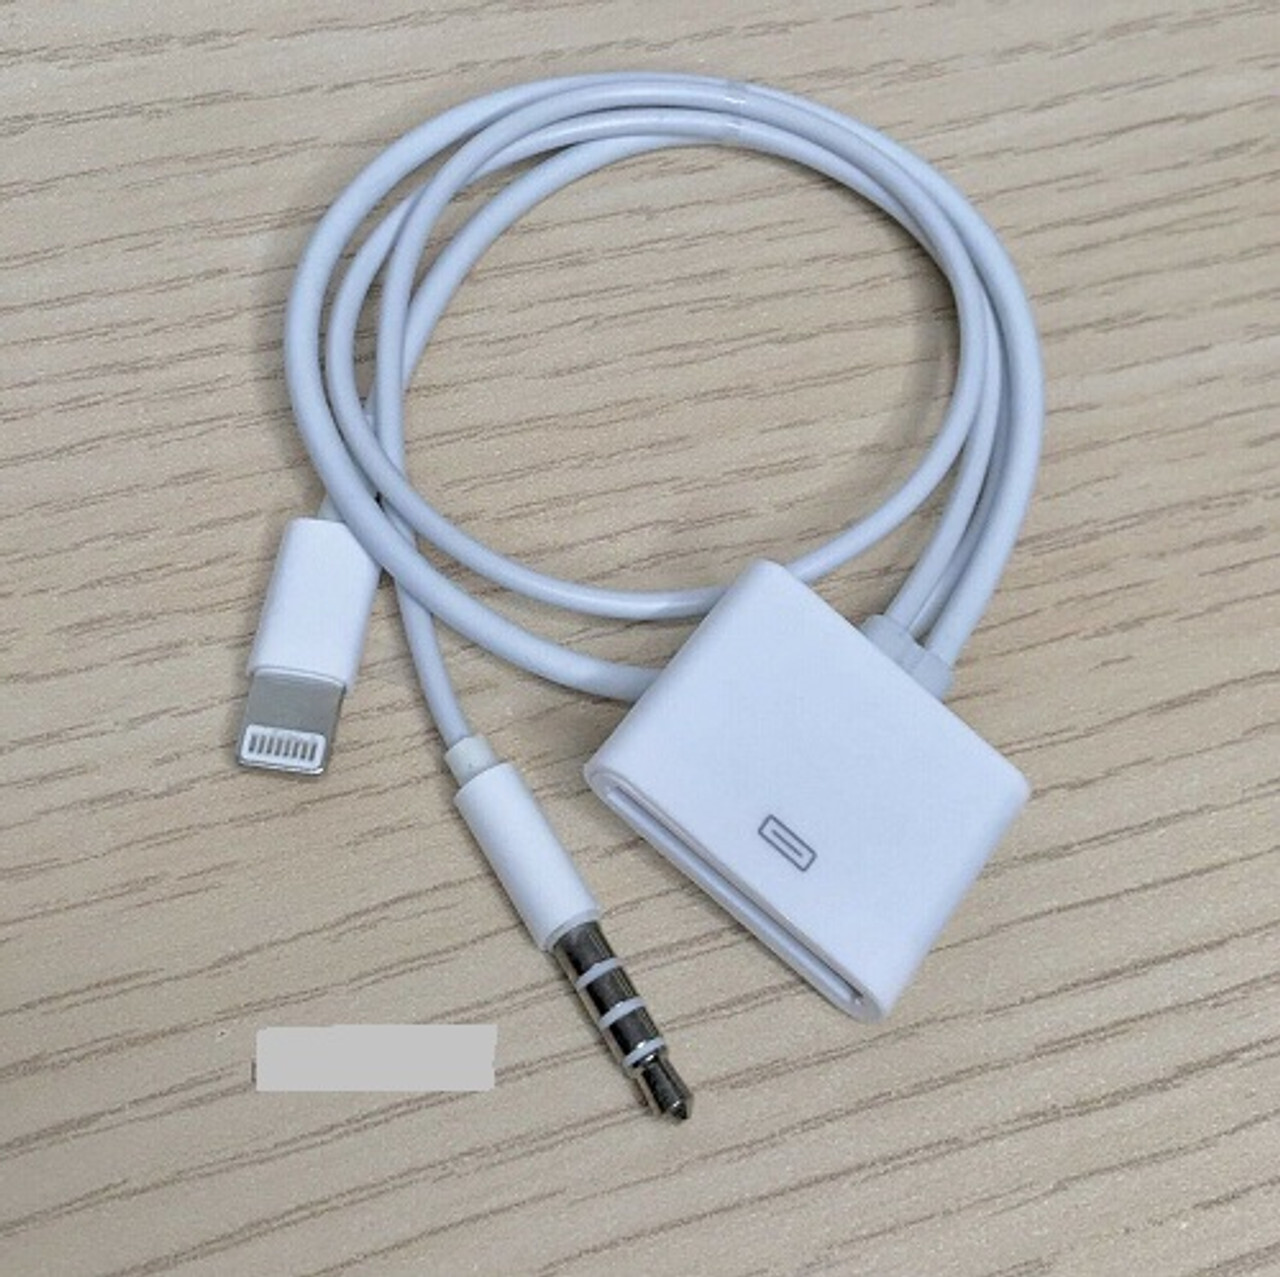 30 Pin to 8 Pin Converter Adapter Aux Cable for Apple iPhone 4